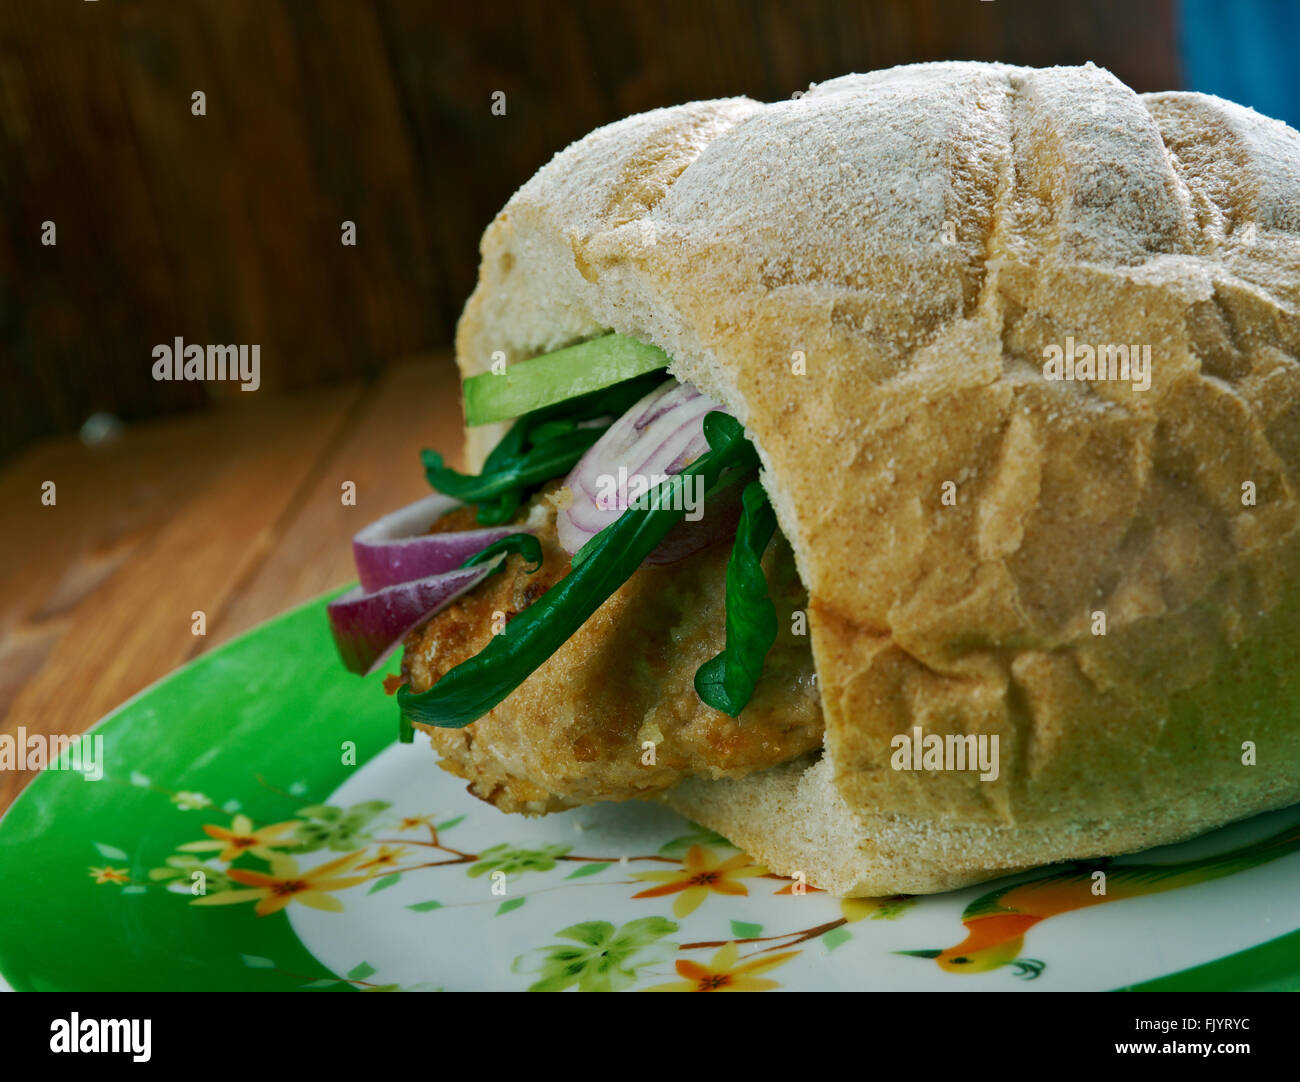 Balkan Burger with lettuce served .close up Stock Photo